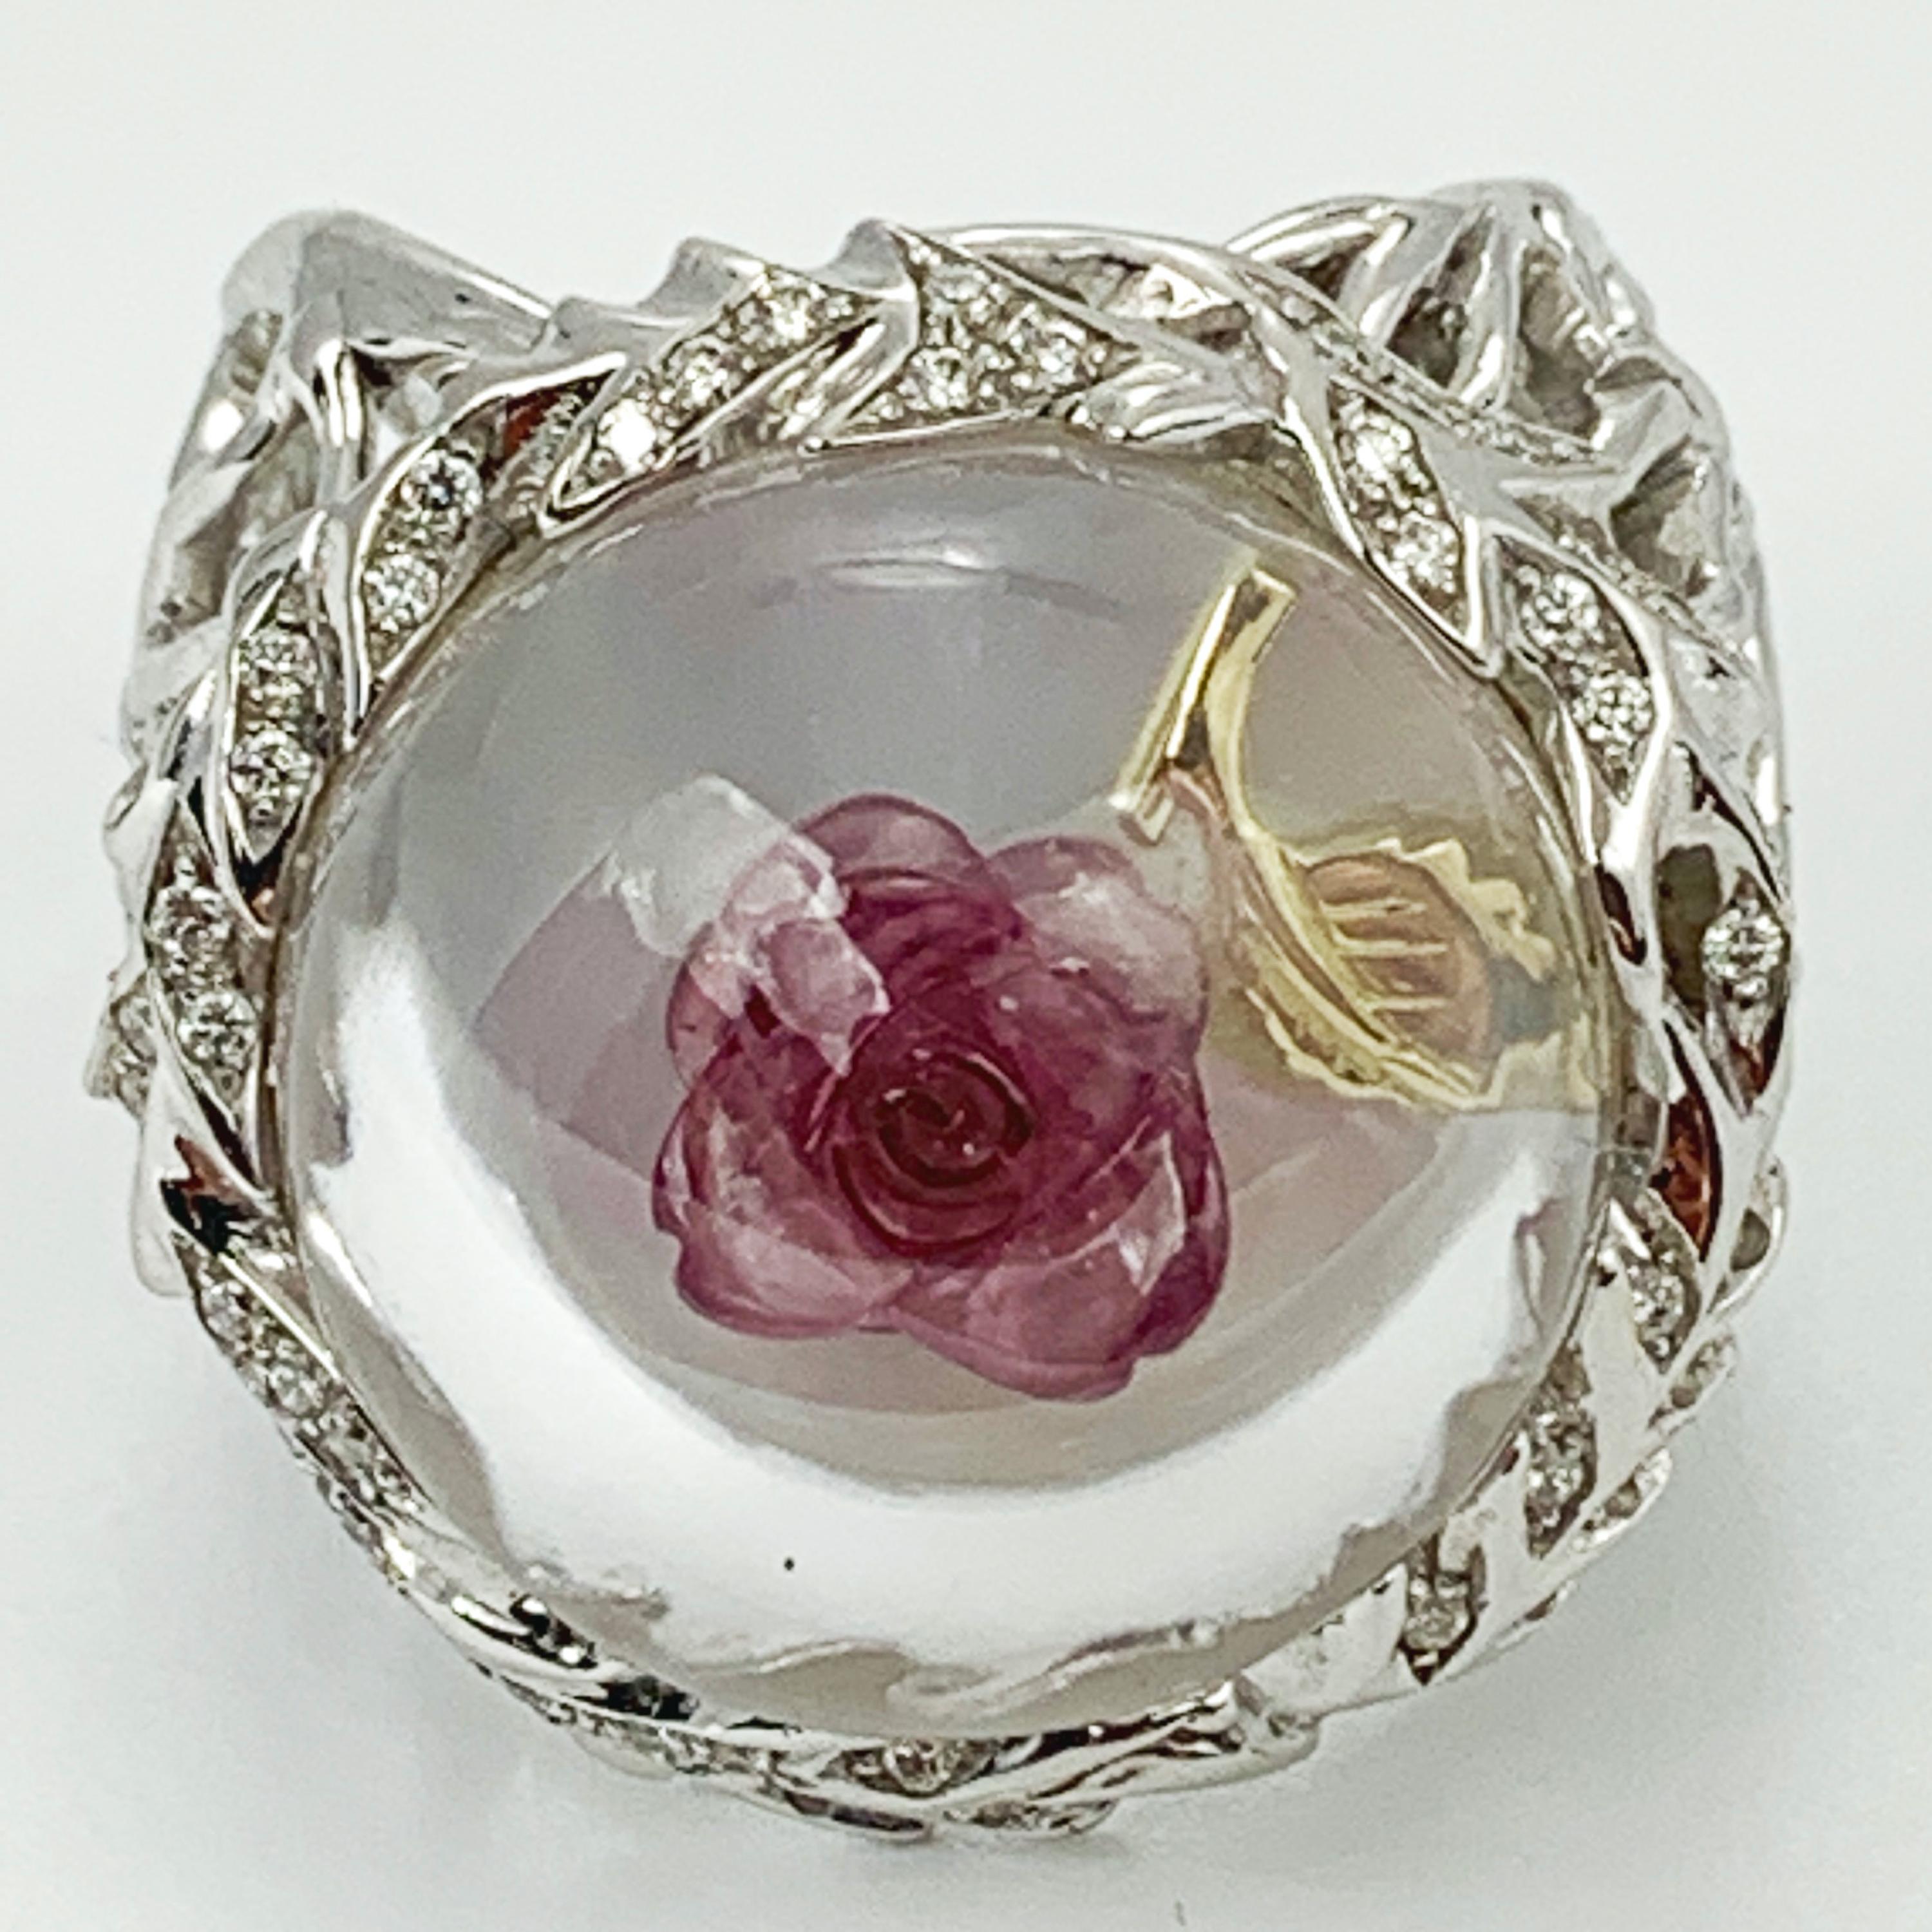 Contemporary Rubellite Rose in Rock Crystal Dome, Diamonds and 18K White Gold Ring by Édéenne For Sale